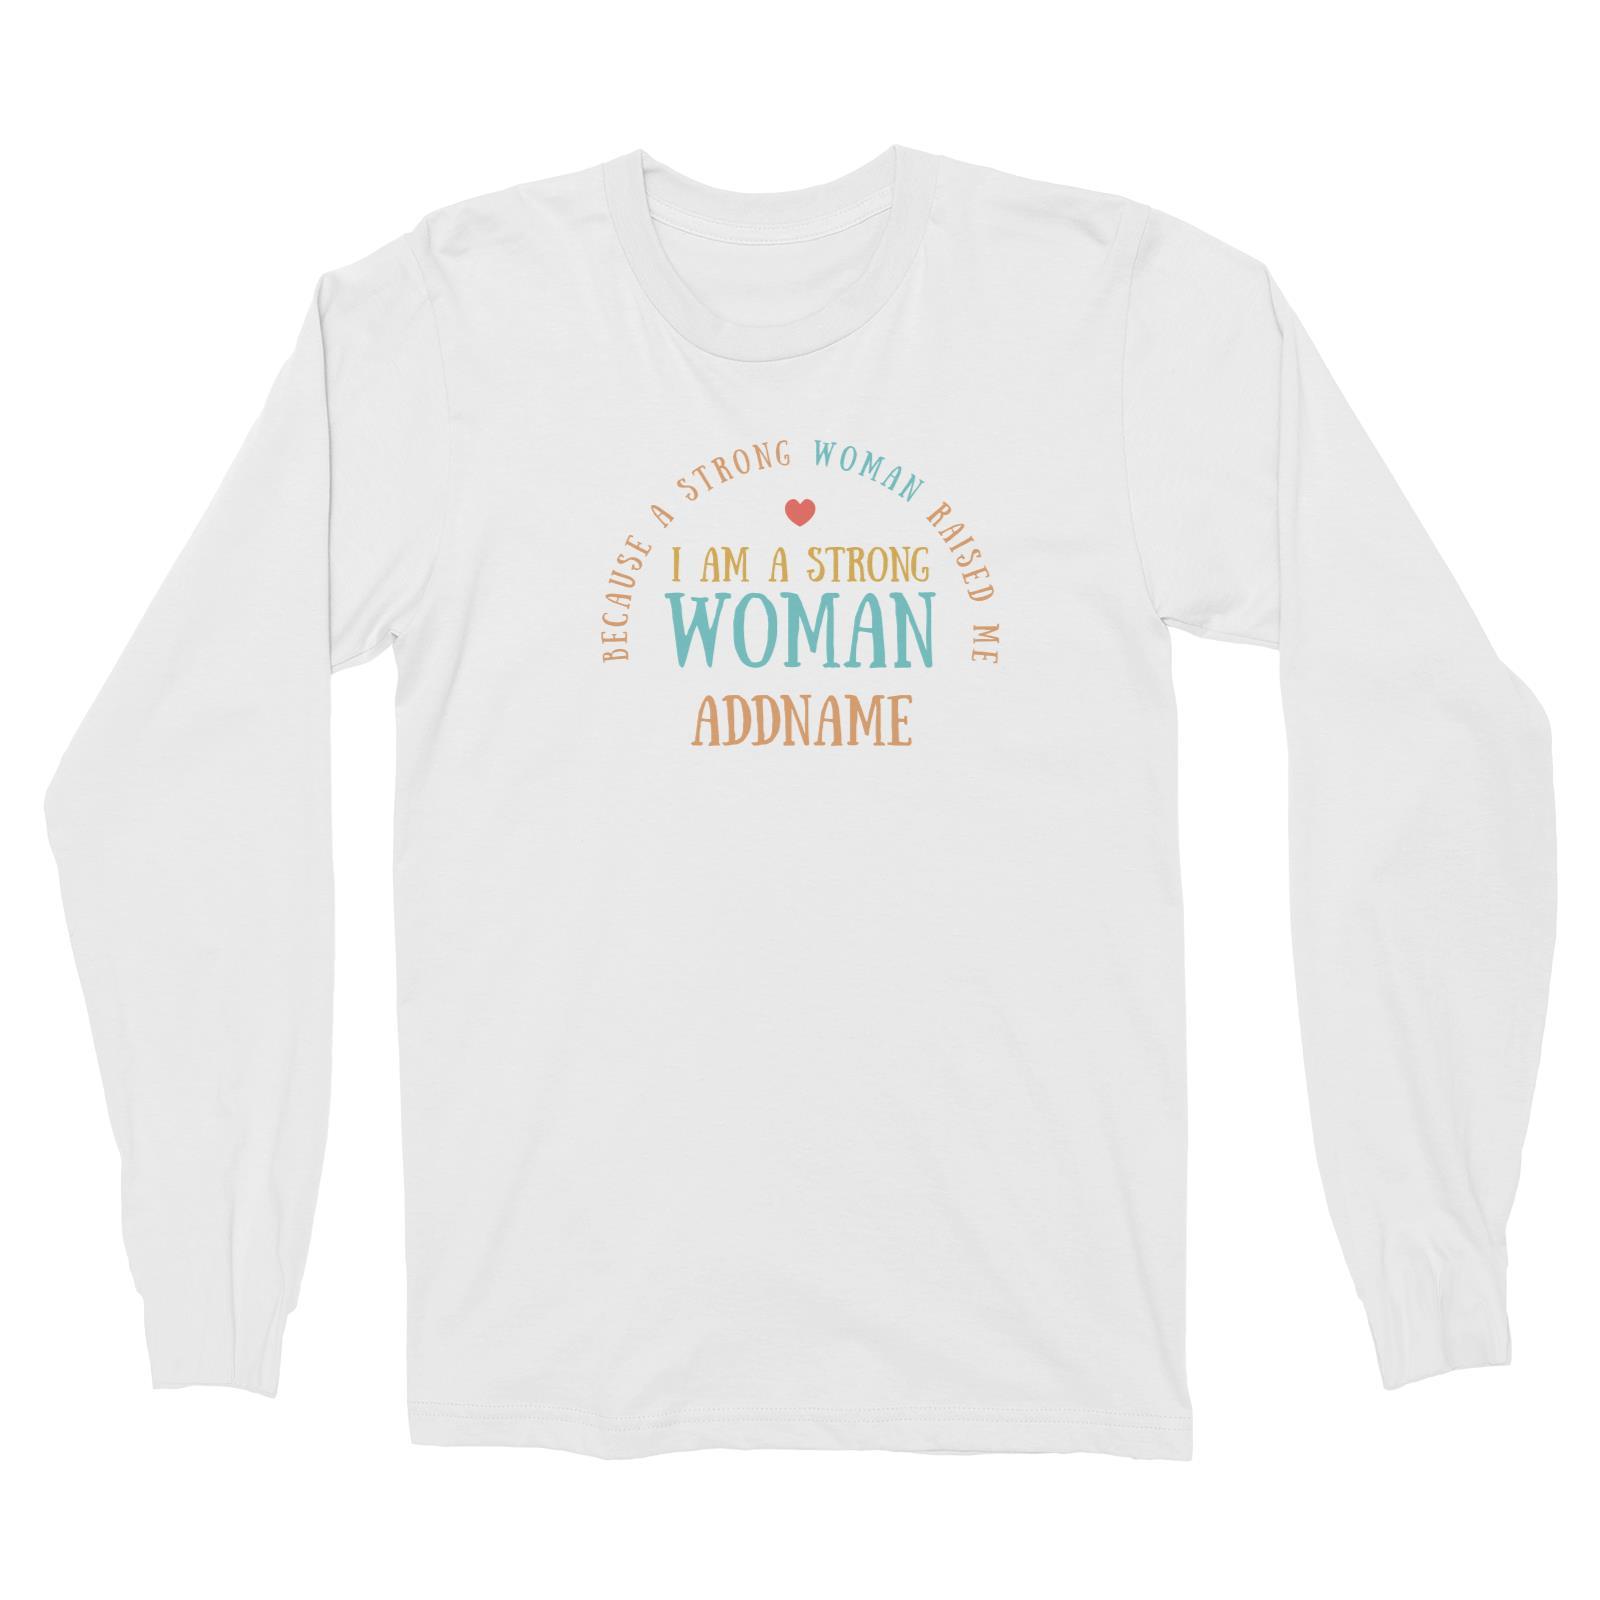 Sweet Mom Quotes 2 I Am A Strong Woman Because A Strong Woman Raised Me Addname Long Sleeve Unisex T-Shirt